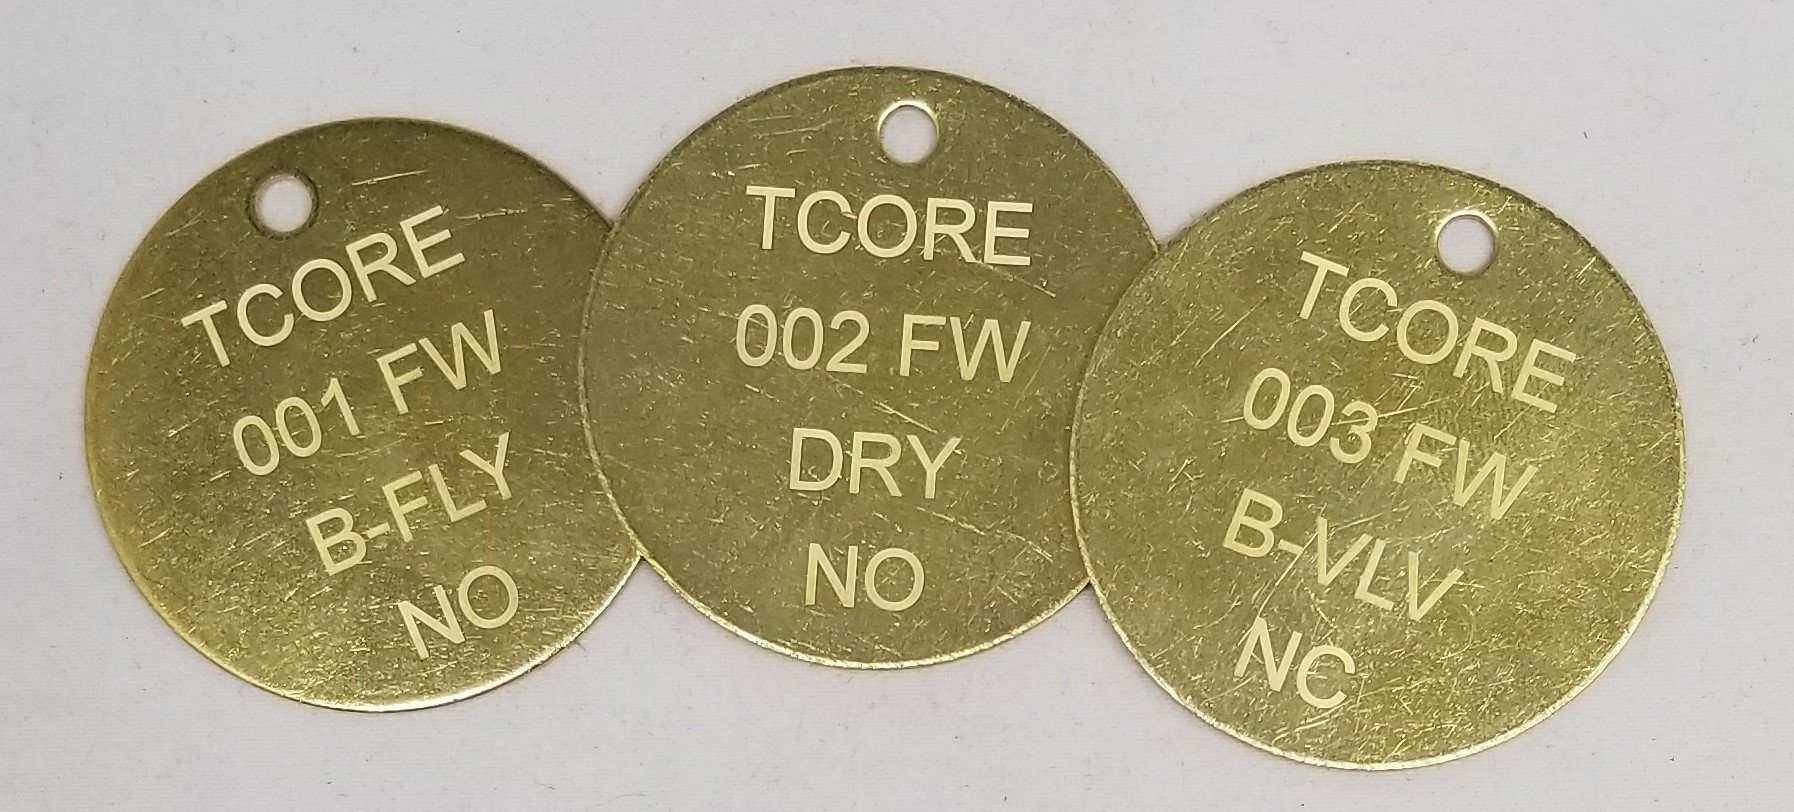 Brass Identification/Equipment Tags, Laser Marked 1" Brass Tags Craftworks NW 